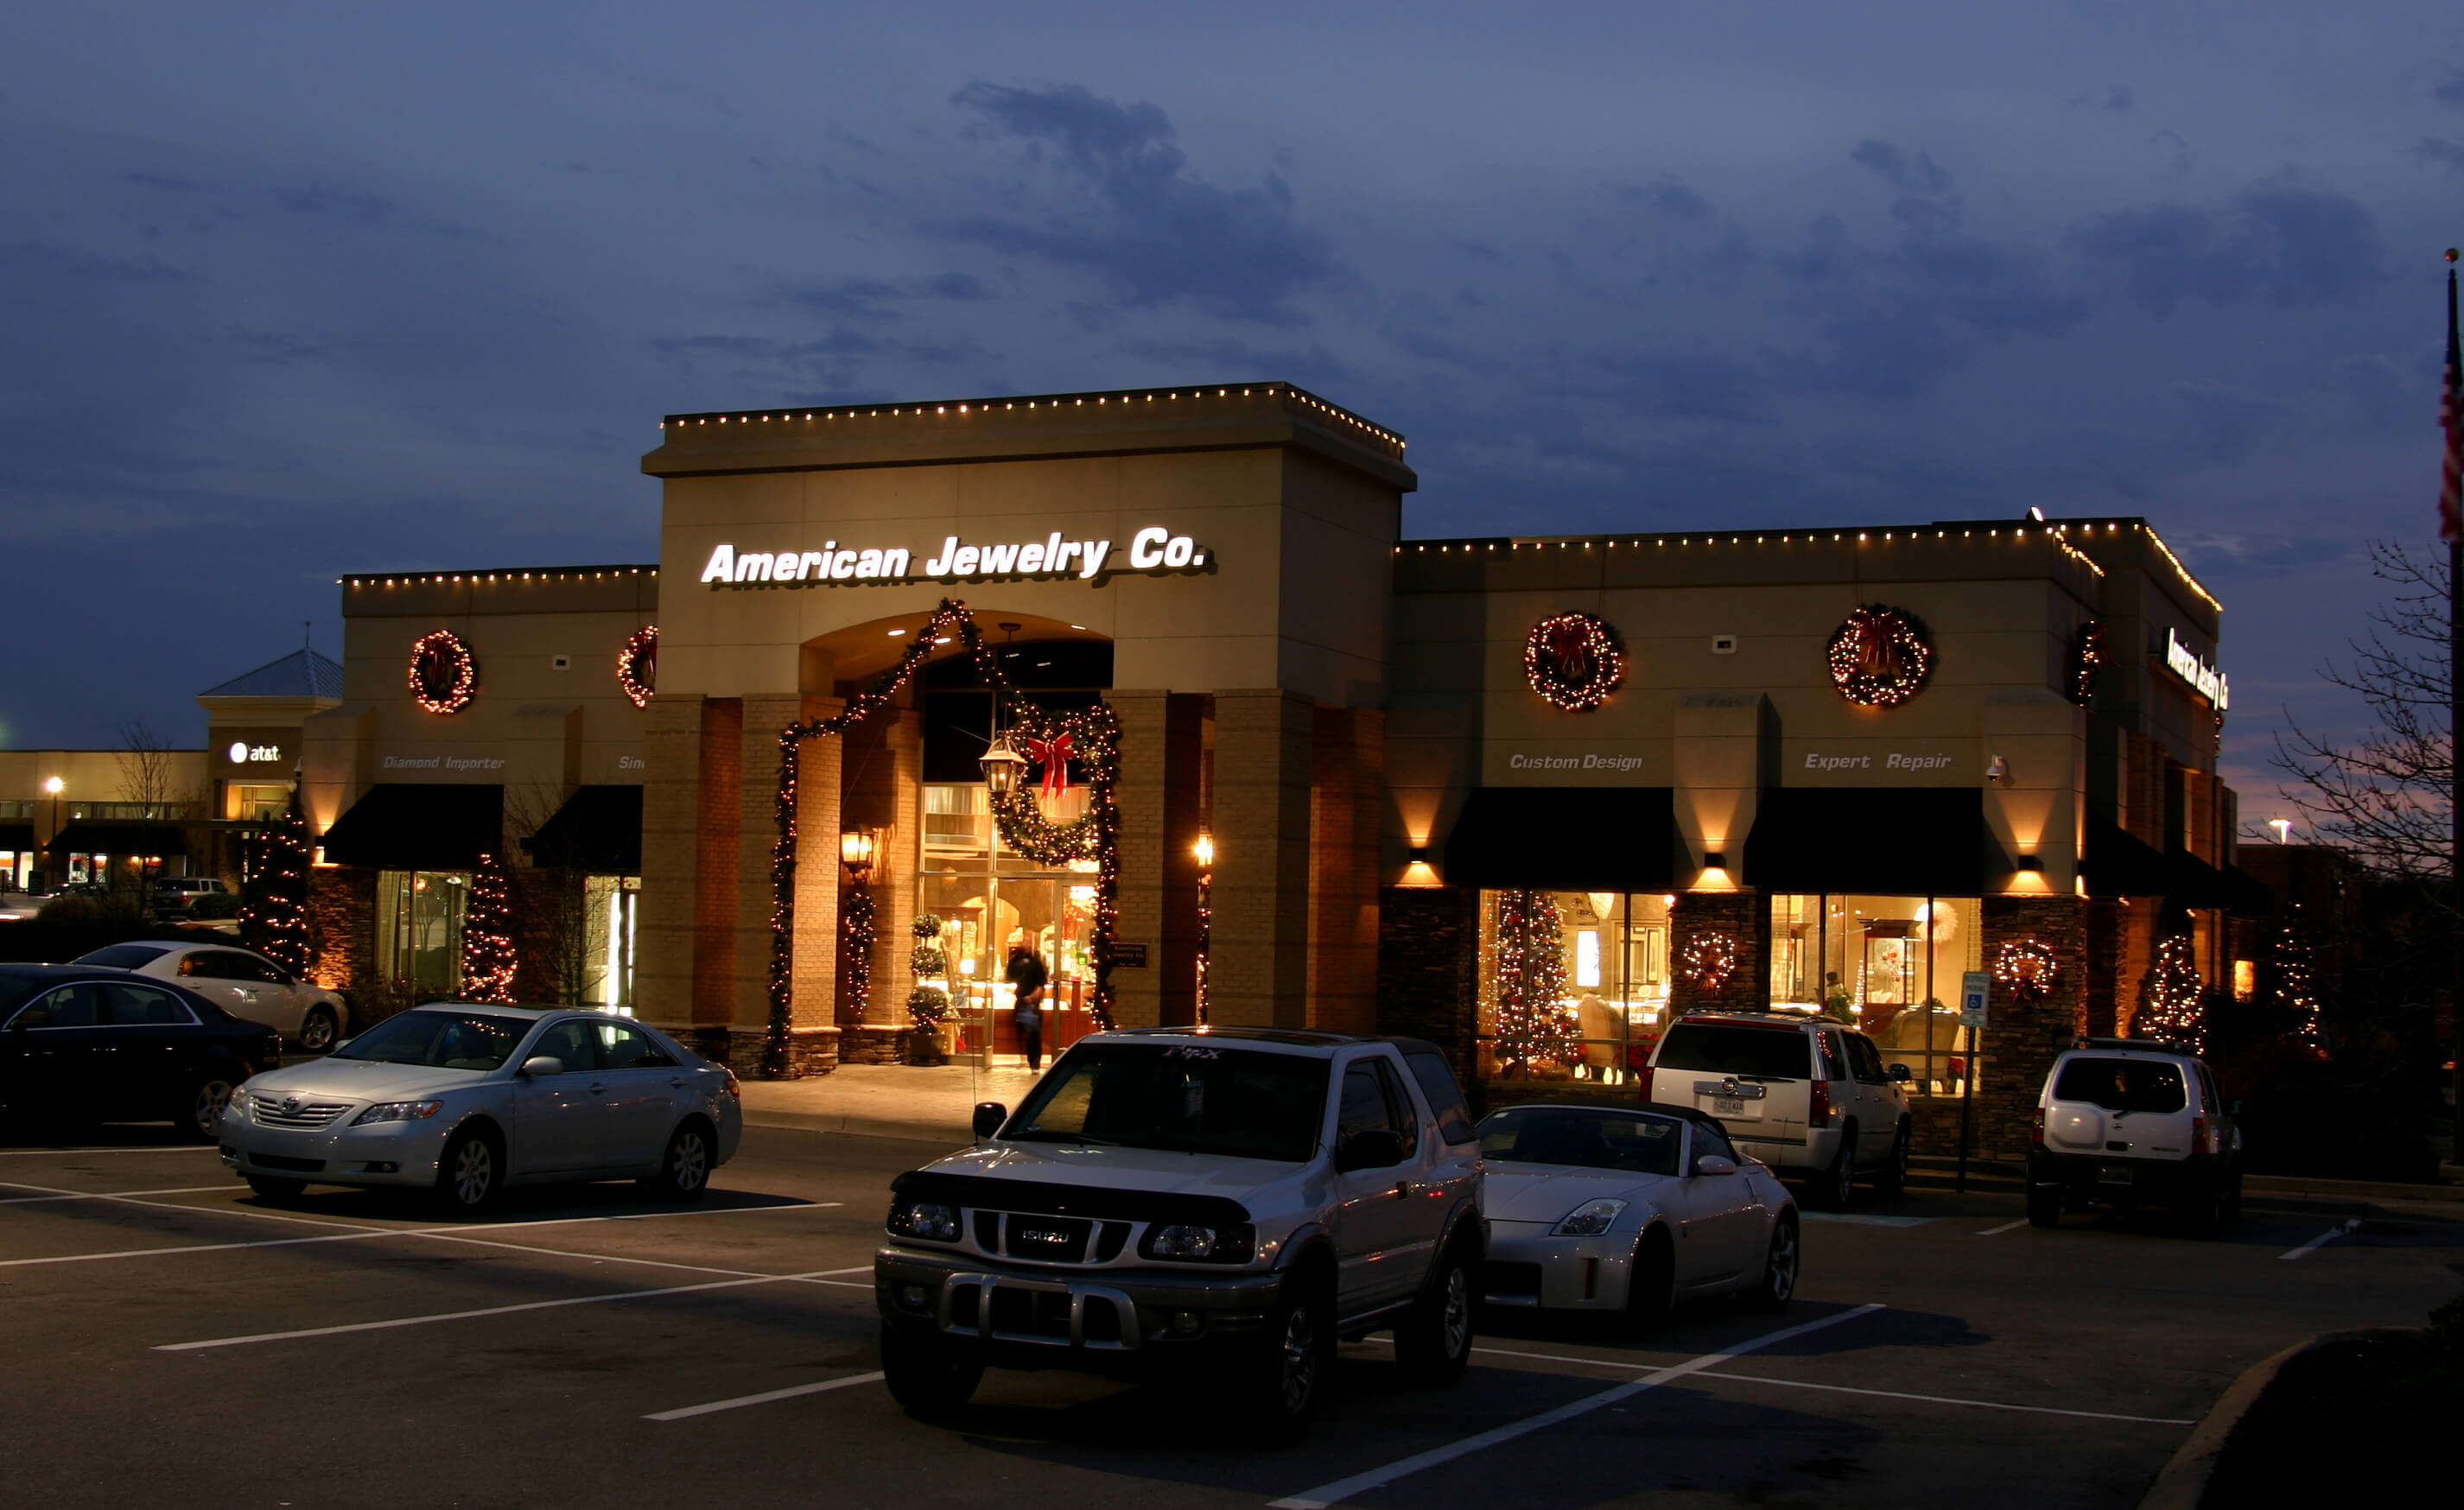 American Jewelry Co. Building with Christmas lights